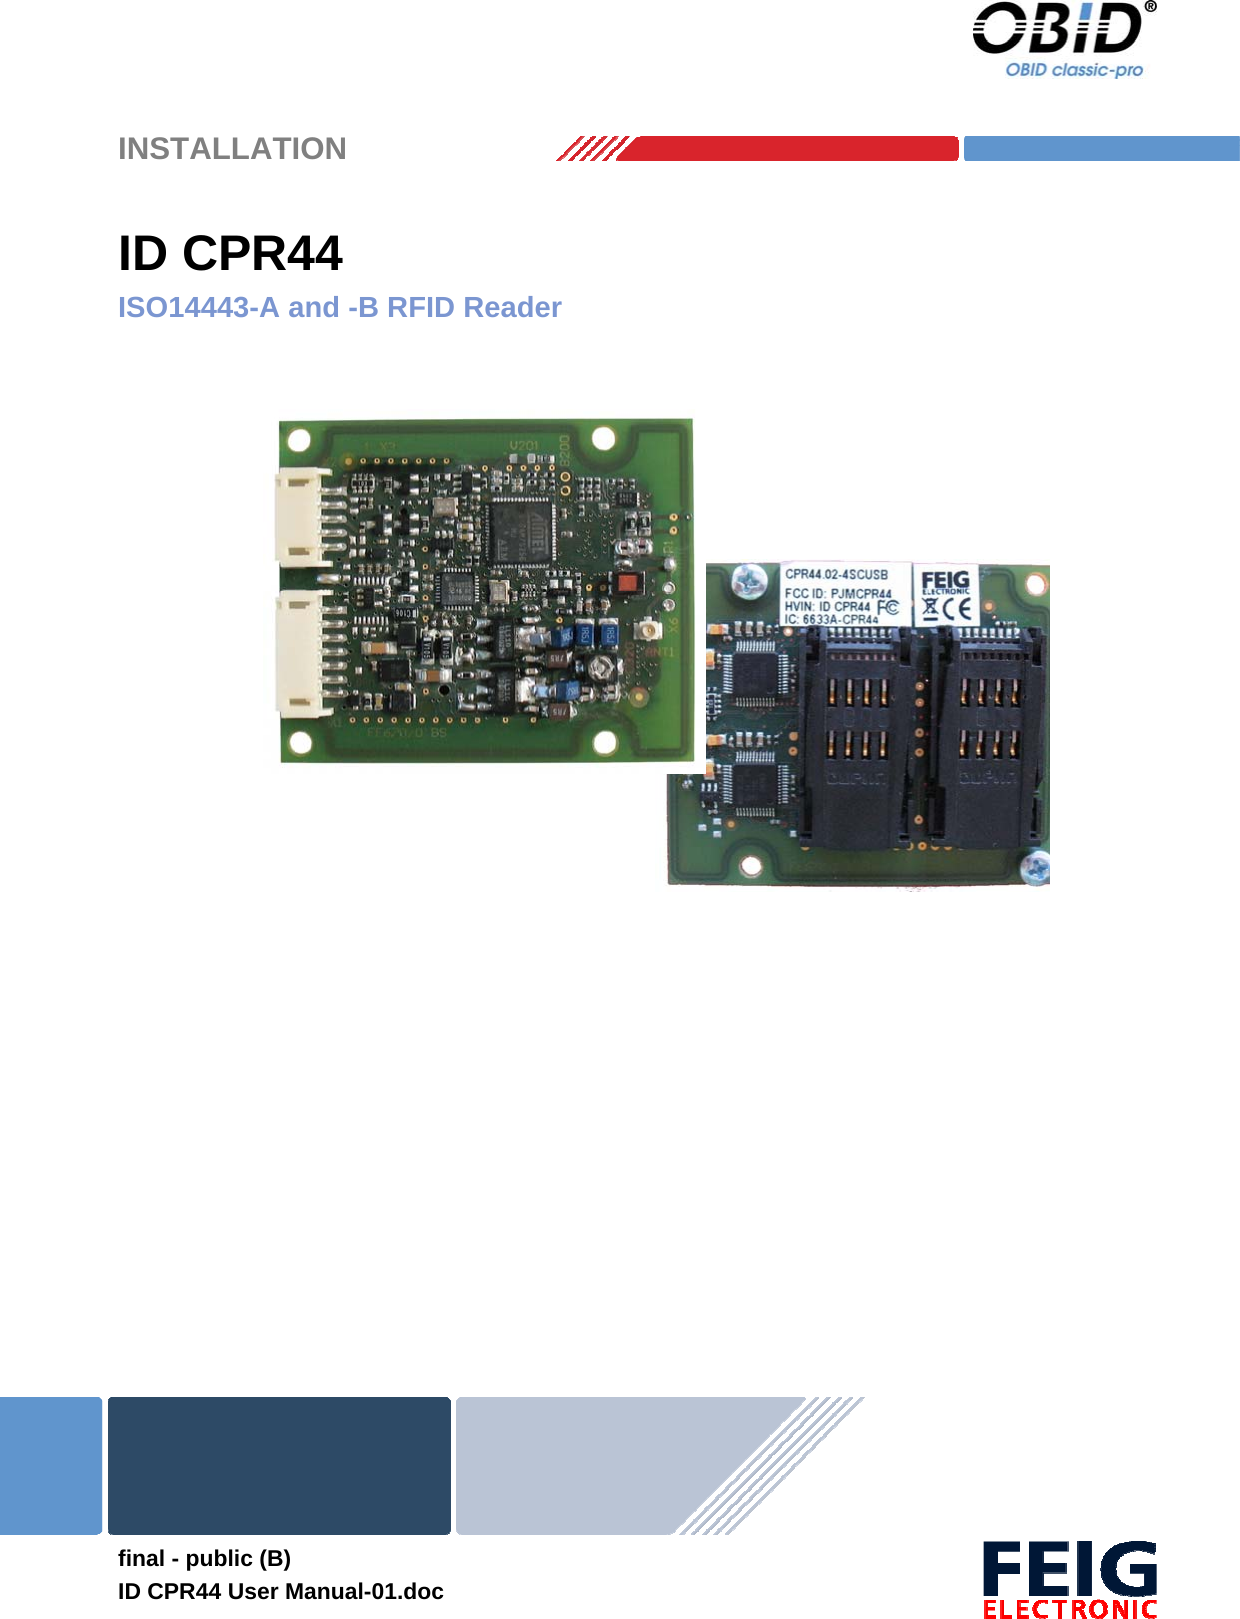    INSTALLATION  final - public (B) ID CPR44 User Manual-01.doc  ID CPR44 ISO14443-A and -B RFID Reader                